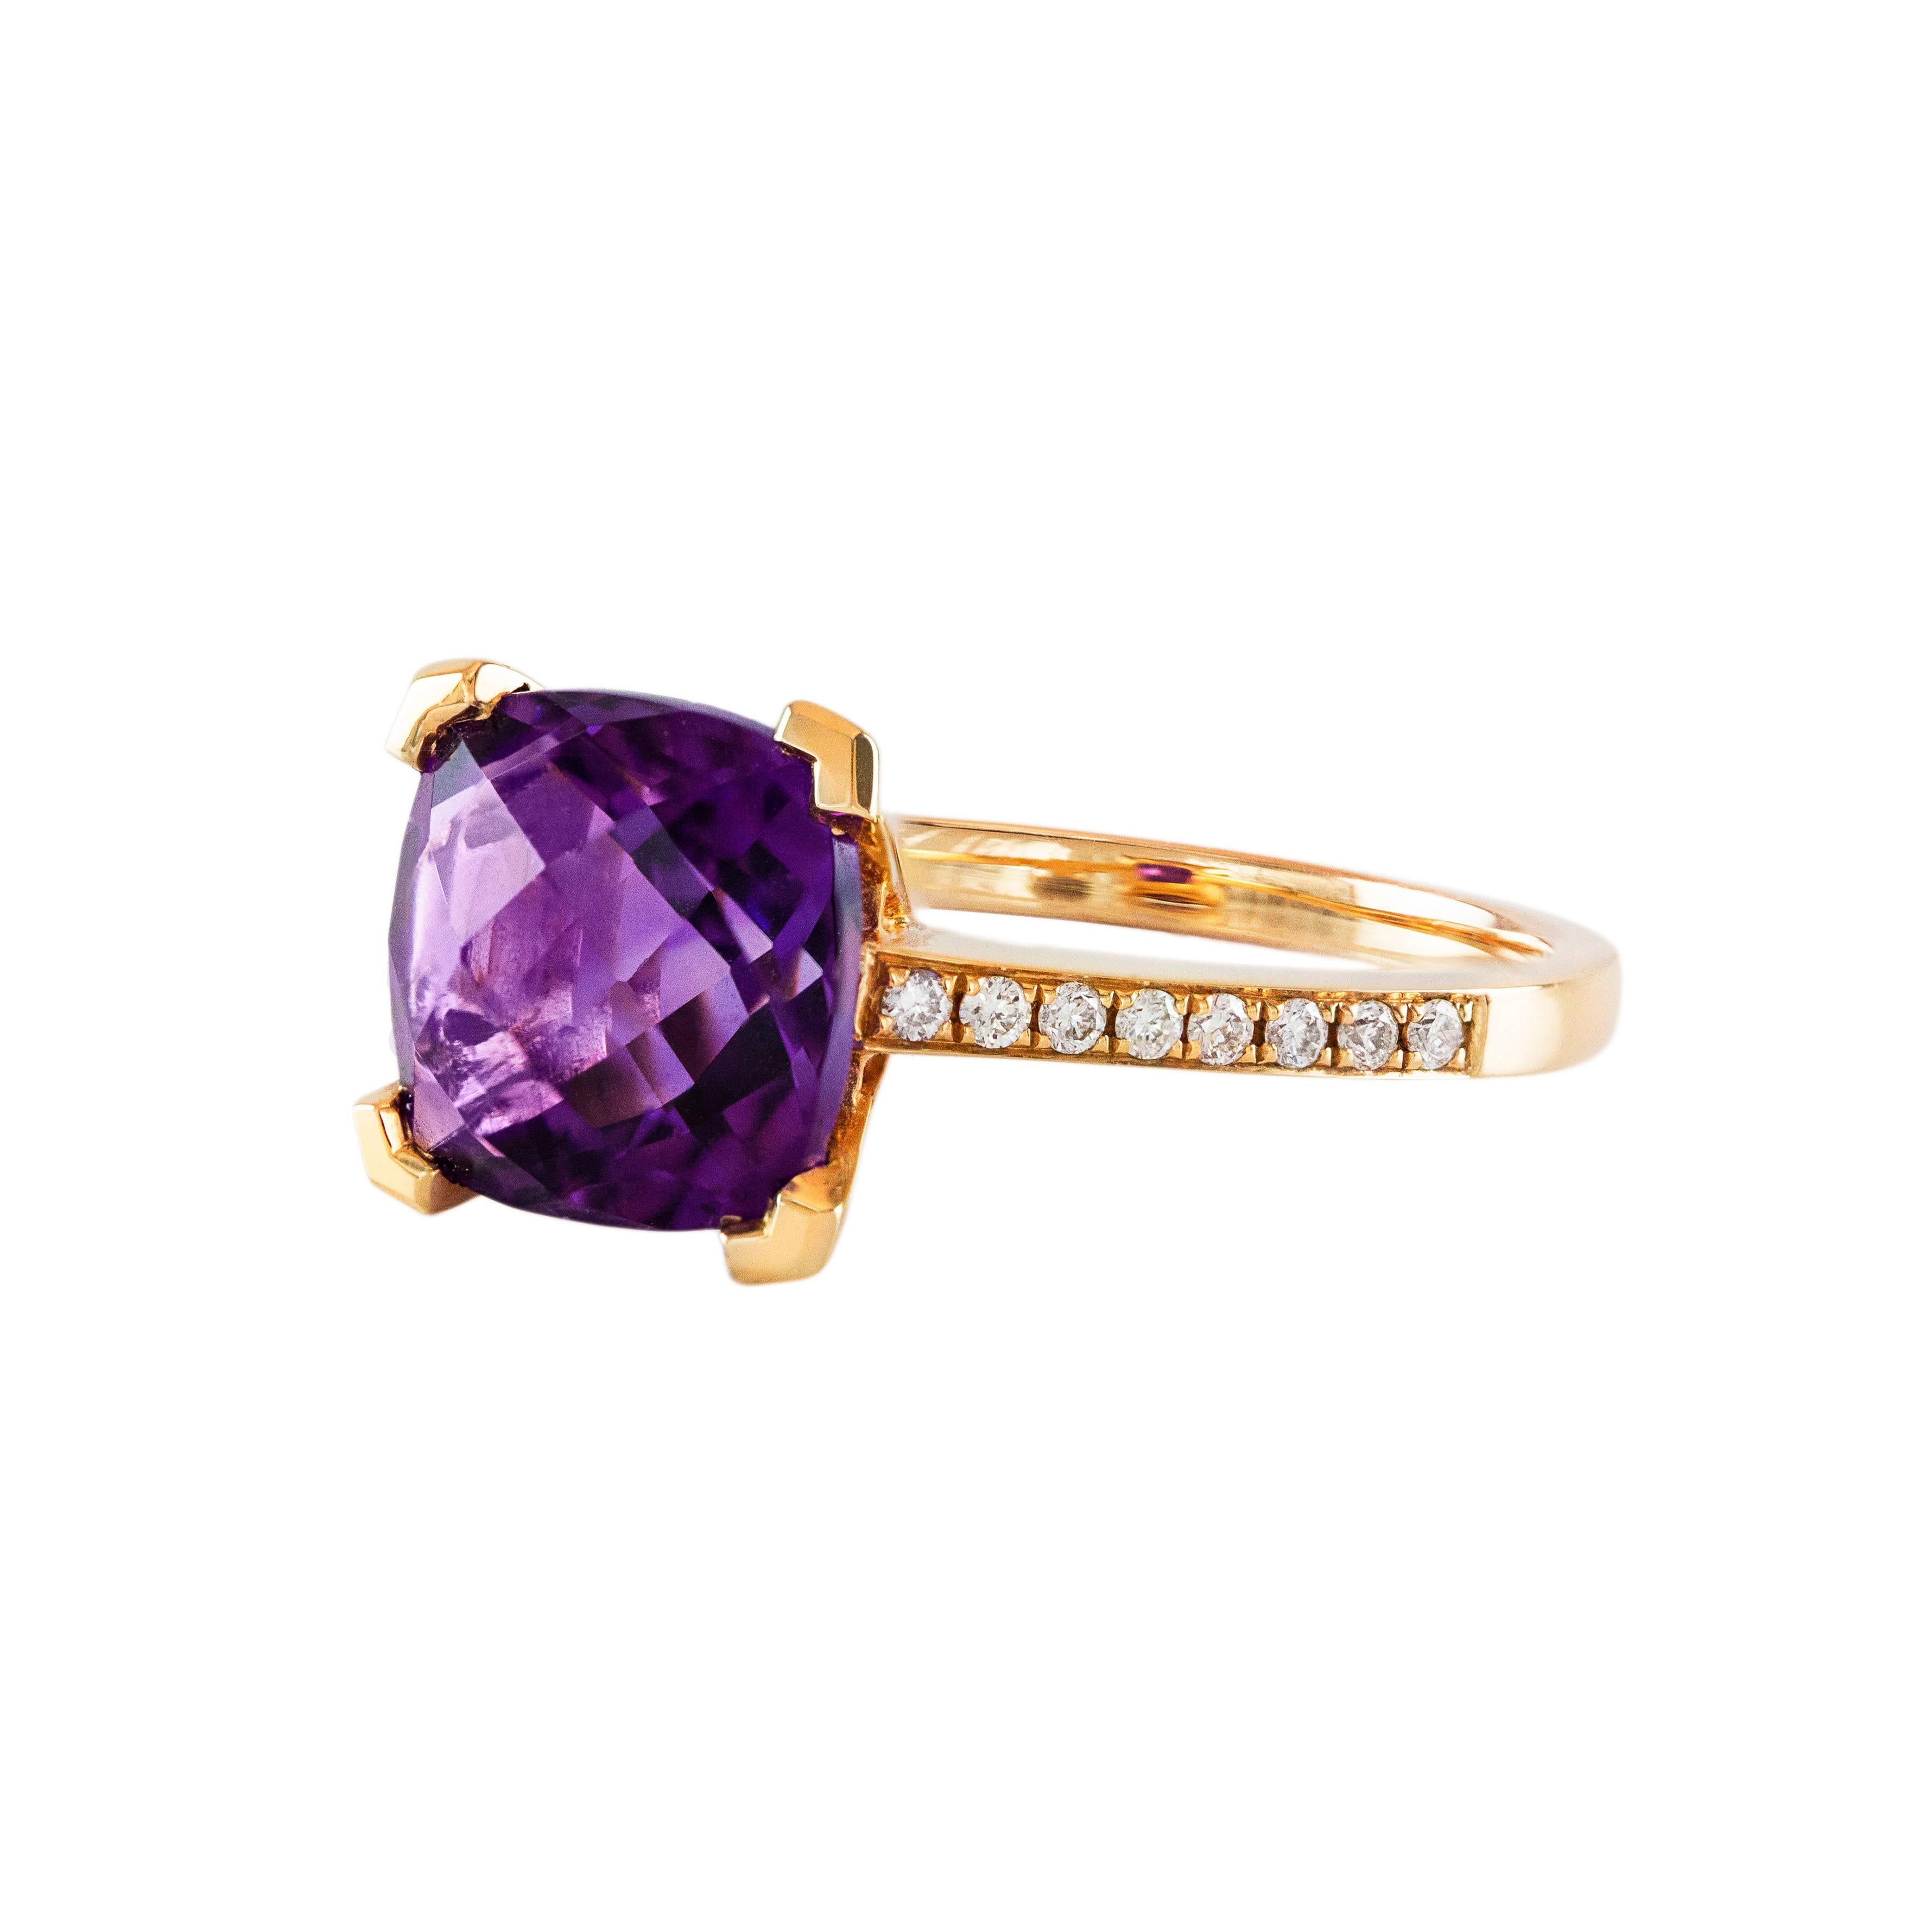 This beautiful set features a cocktail ring with a natural amethyst center stone weighing 3.15 carats. Set on either side of the ring is 0.13 carats of brilliant round diamonds. Made in 18k rose gold. Size 6 3/4 US (sizable).

This ring is part of a